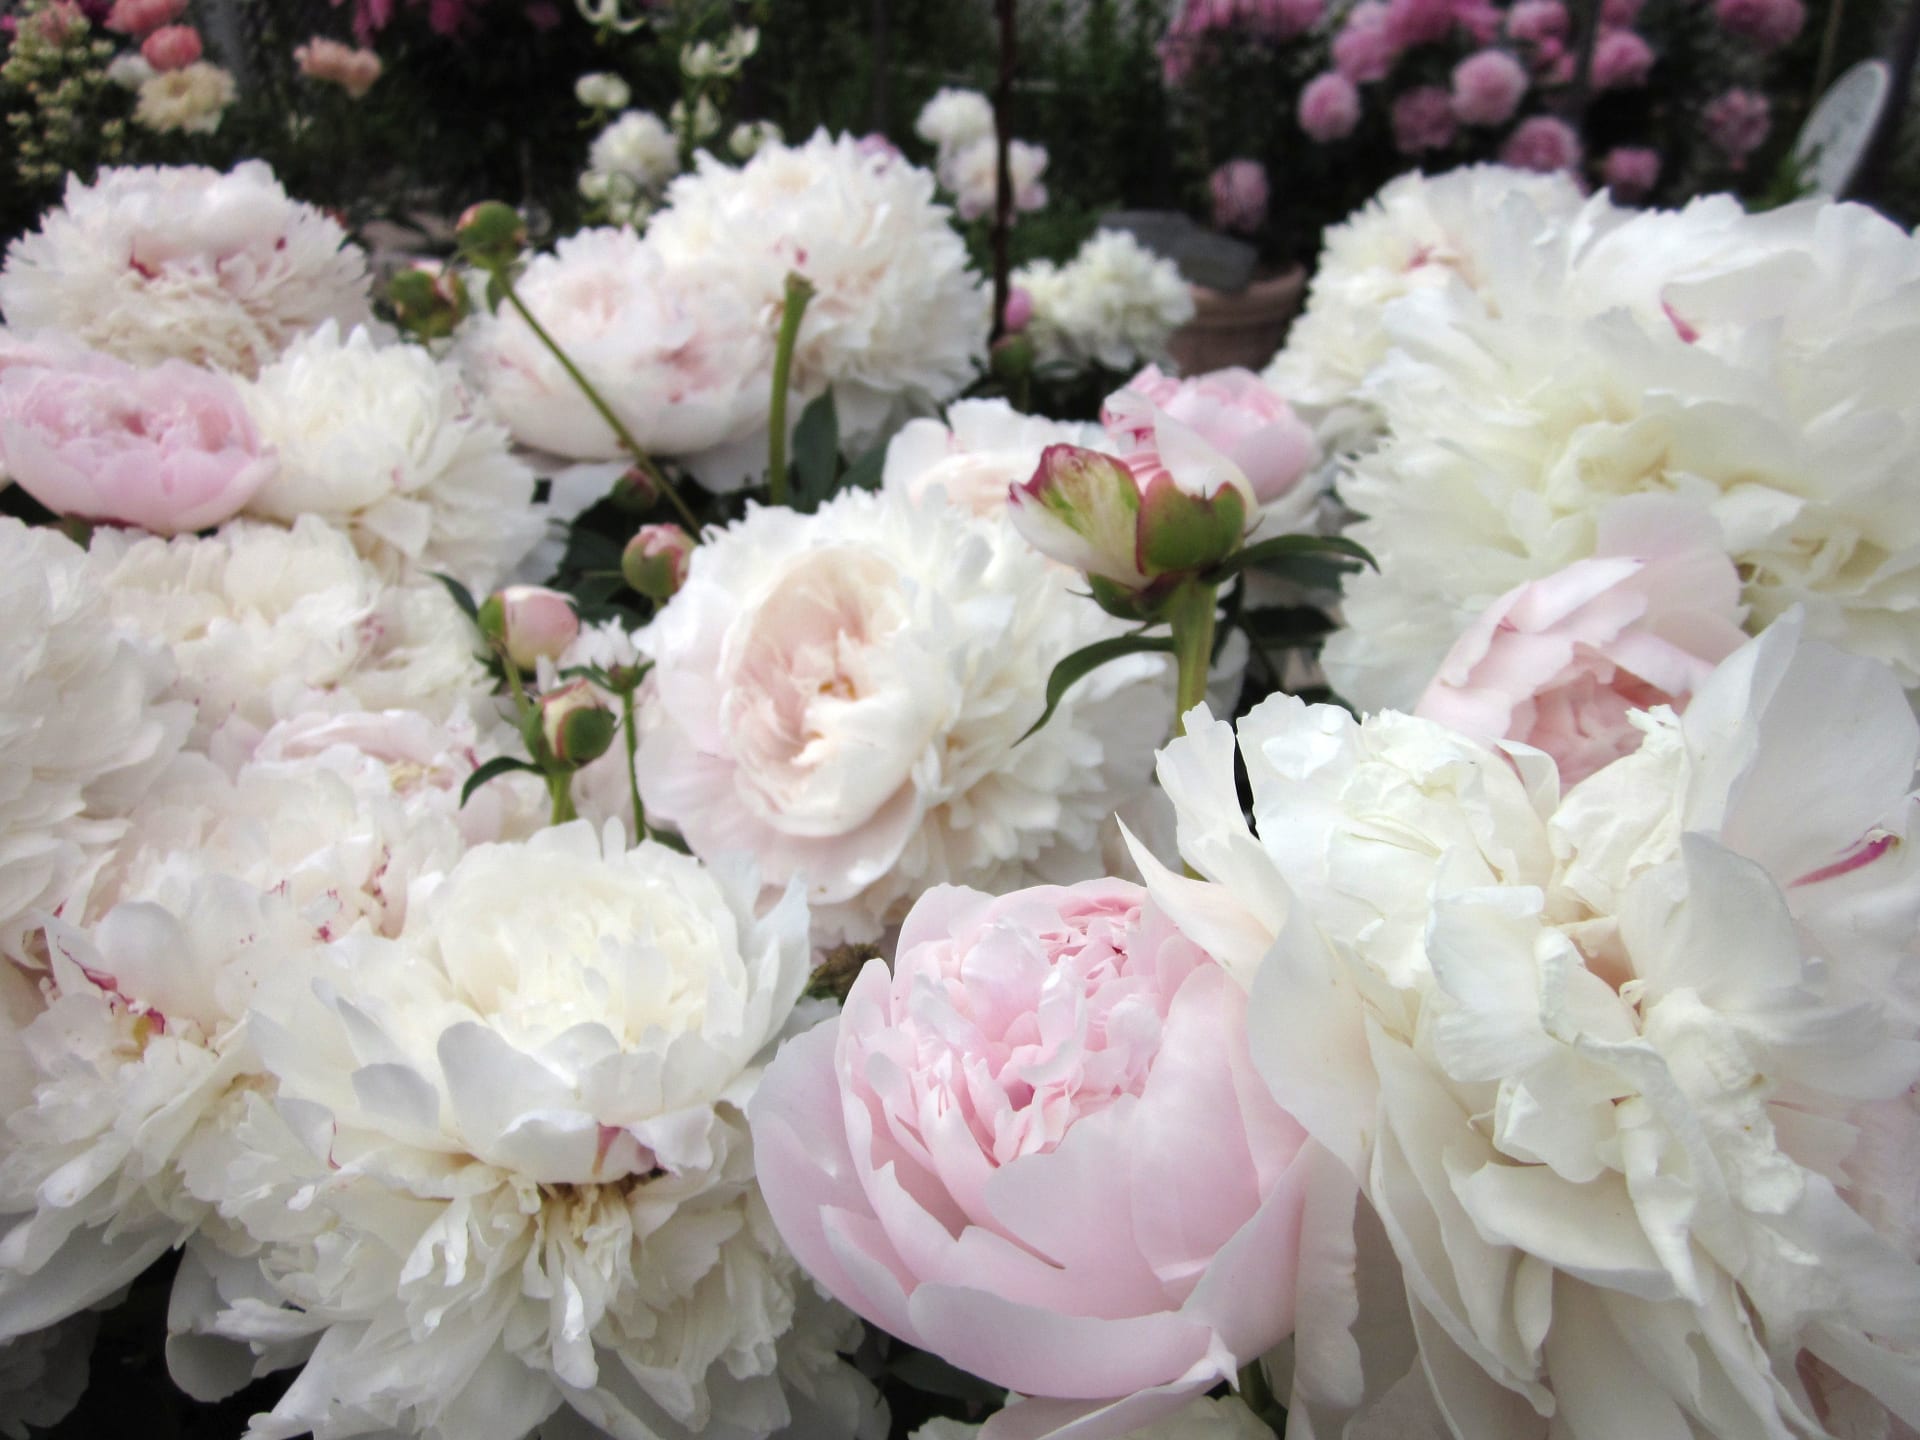 The early July highpoint at Arctic Garden is the hundred or so peonies.